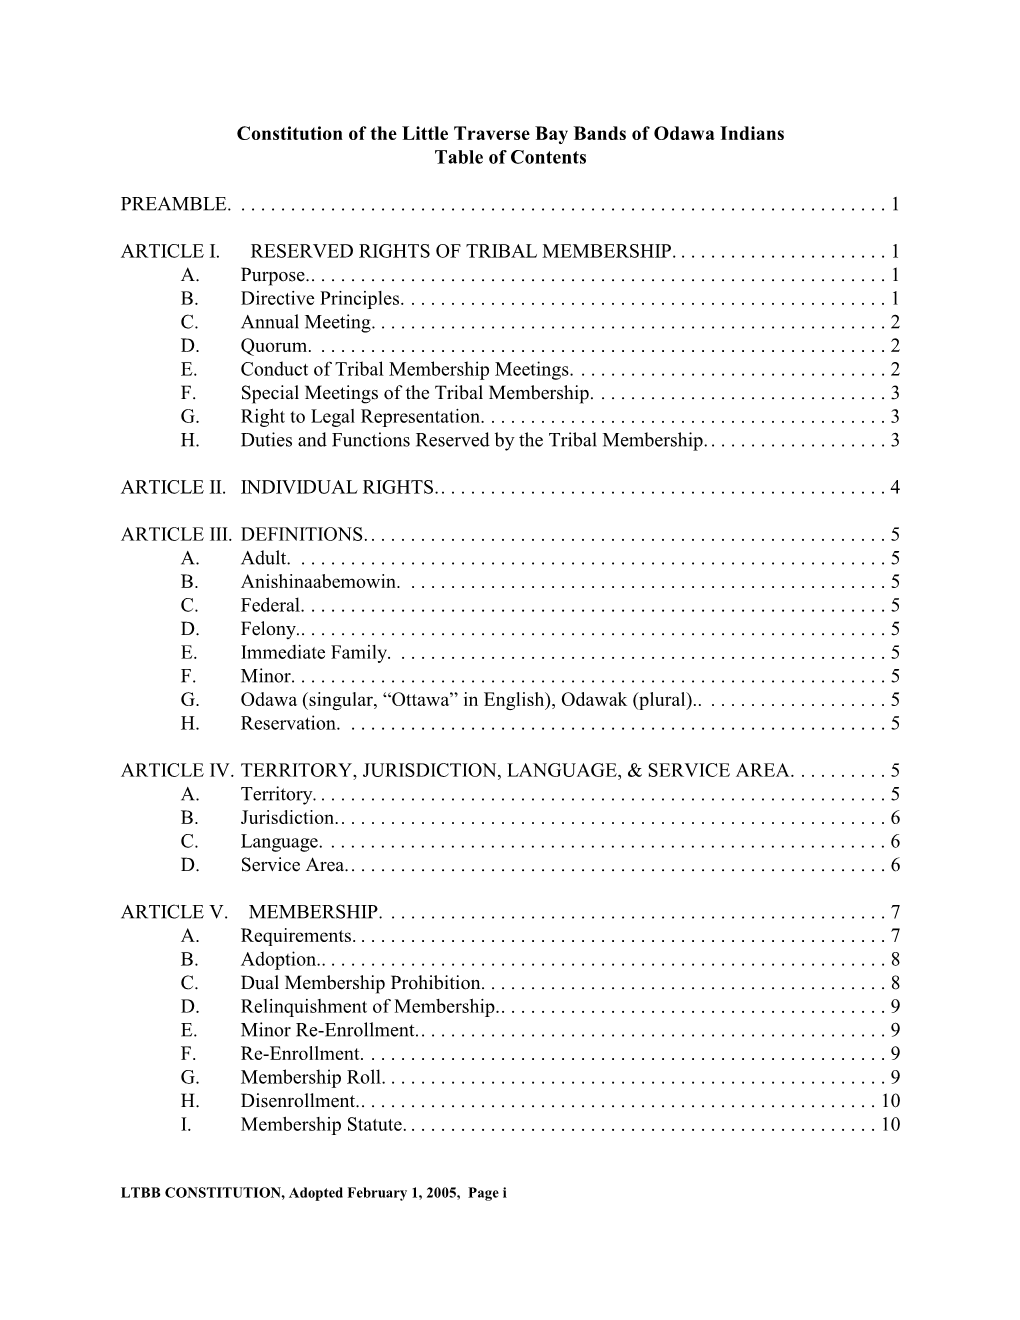 Constitution of the Little Traverse Bay Bands of Odawa Indians Table of Contents